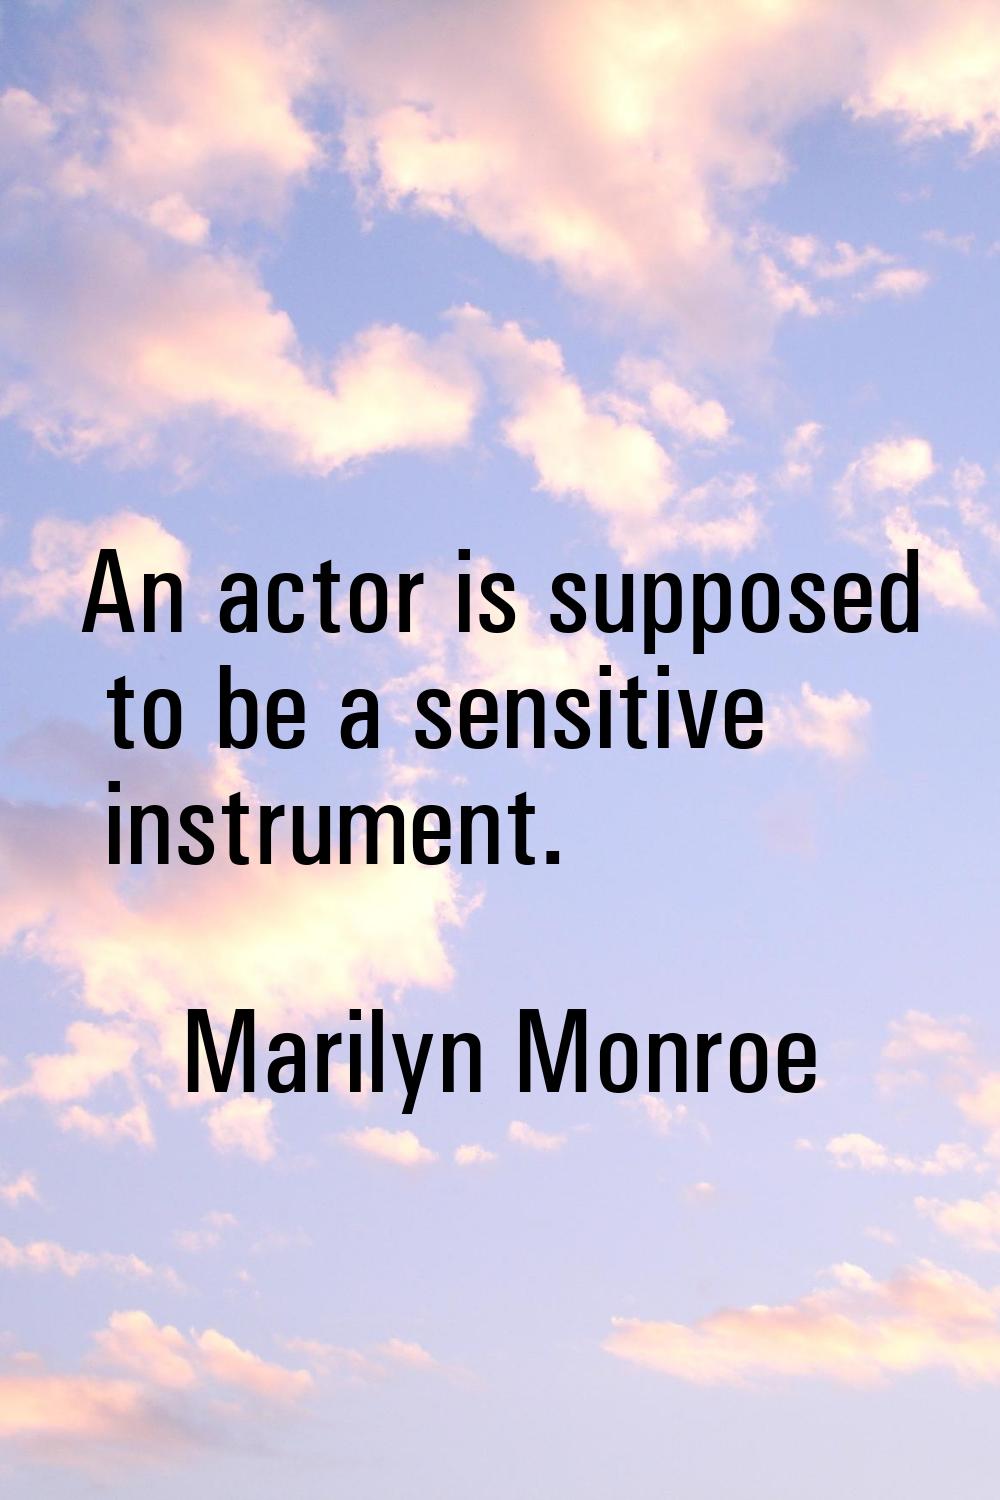 An actor is supposed to be a sensitive instrument.